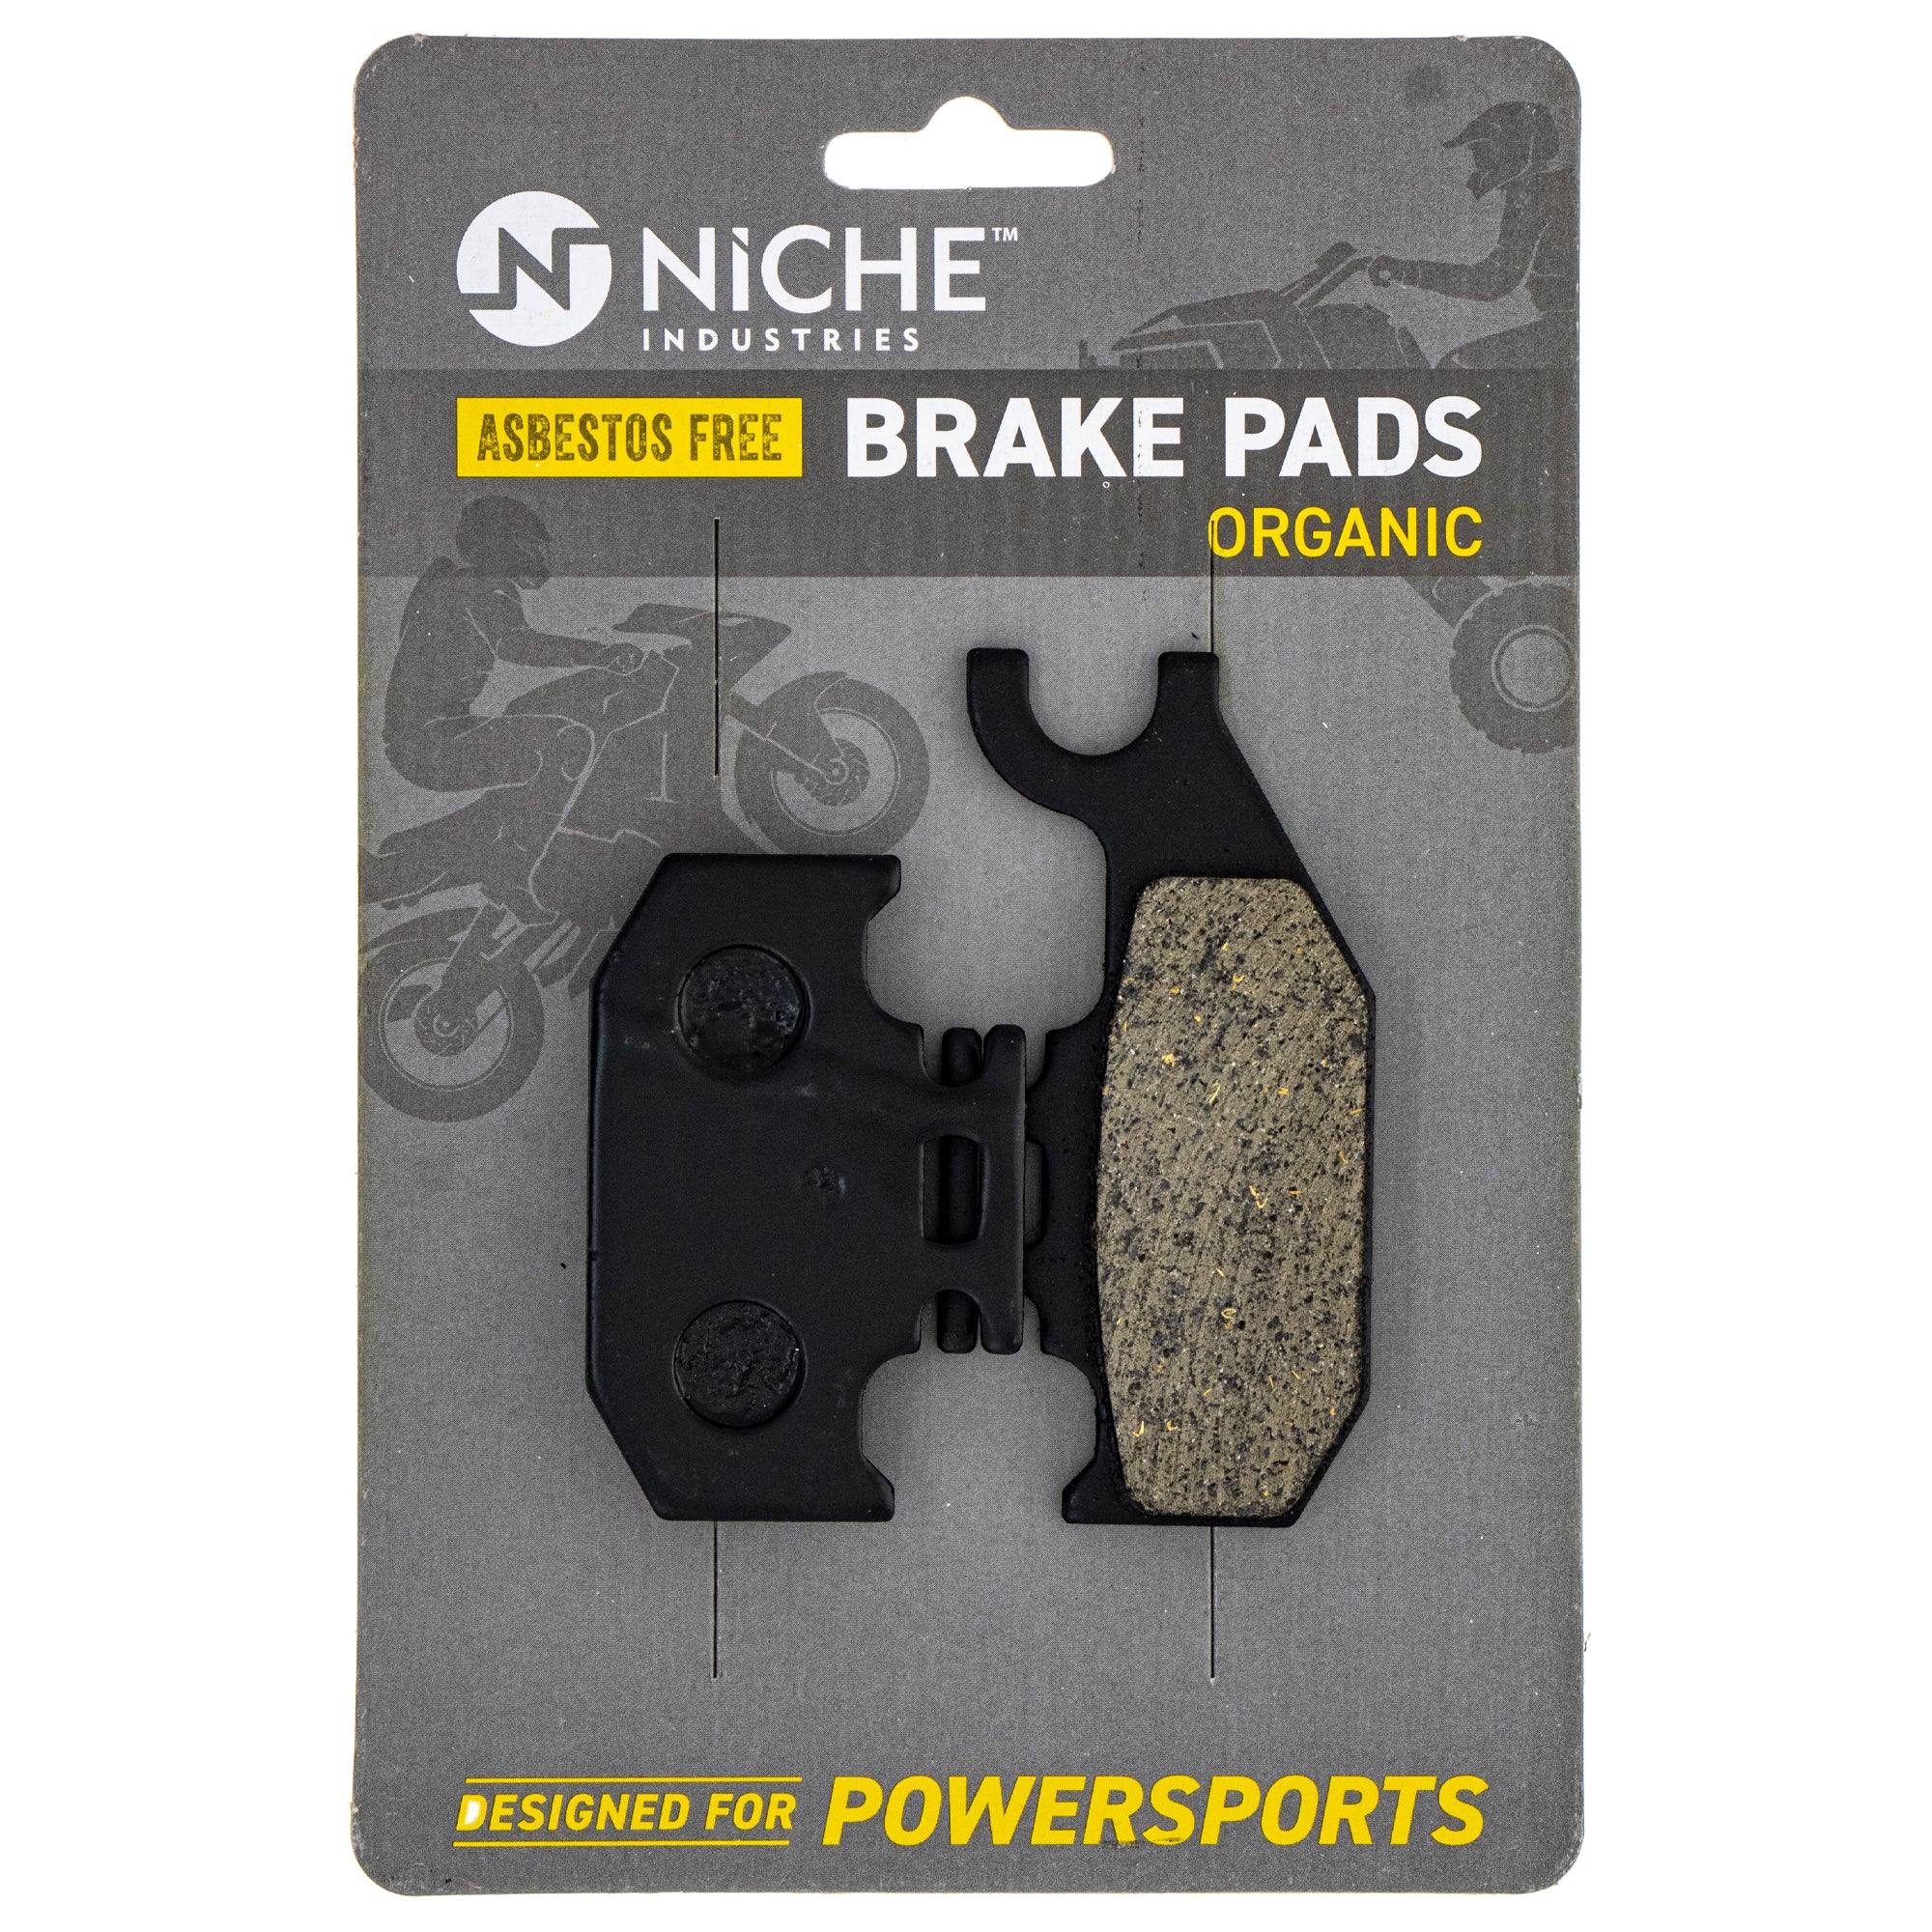 NICHE MK1001570 Brake Pad Kit Front/Rear for BRP Can-Am Ski-Doo